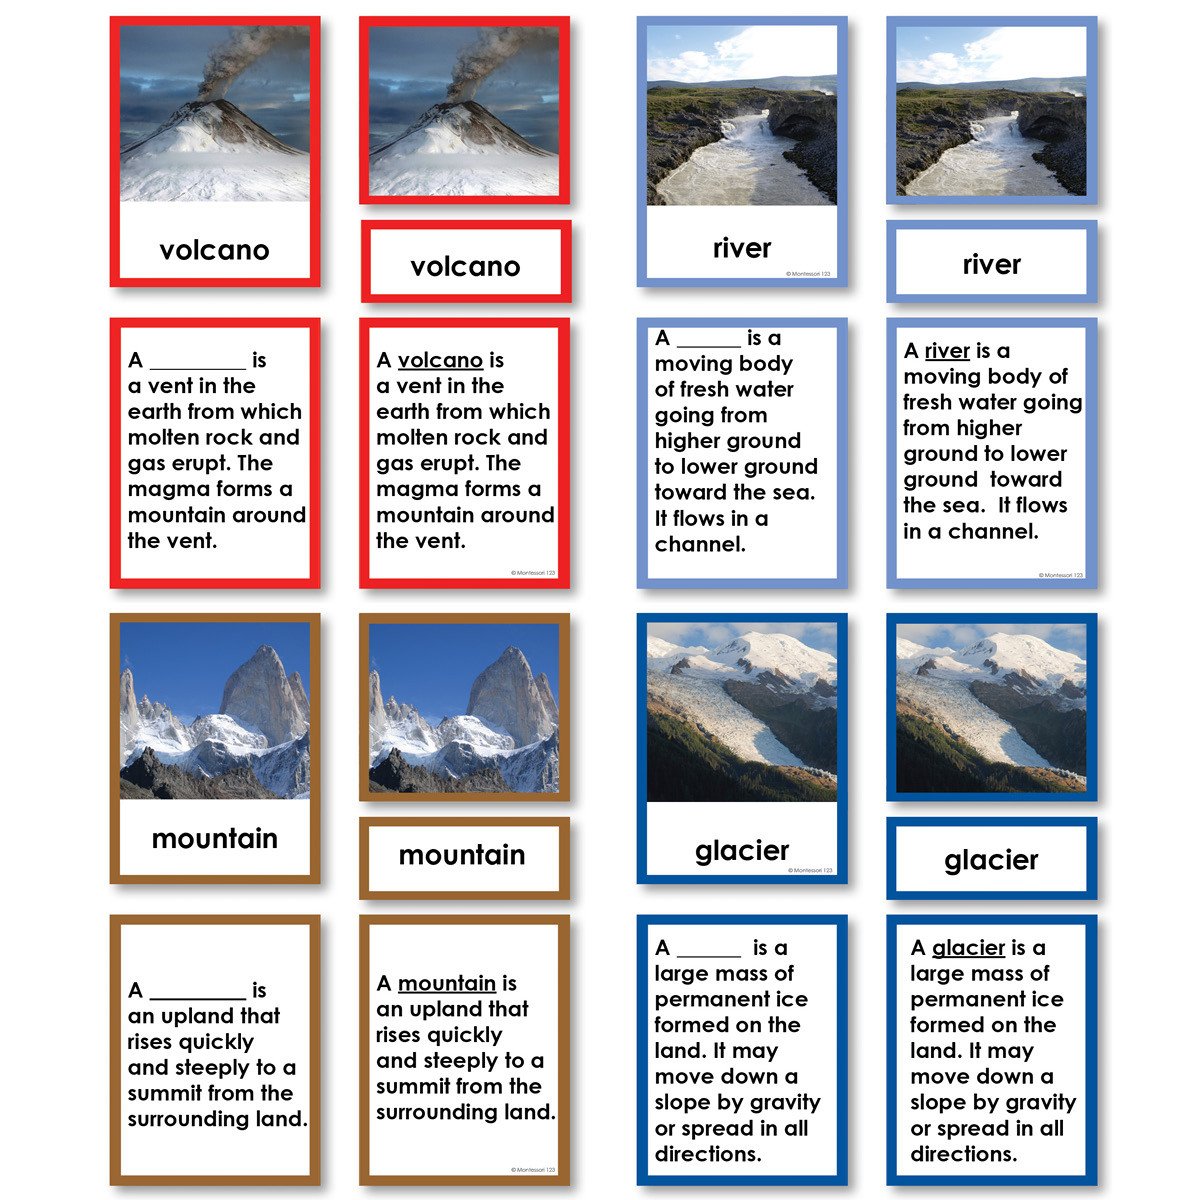 Geography Material-Landforms & Biomes - Parts Of A Volcano, River, Mountain And Glacier 3-Part Cards